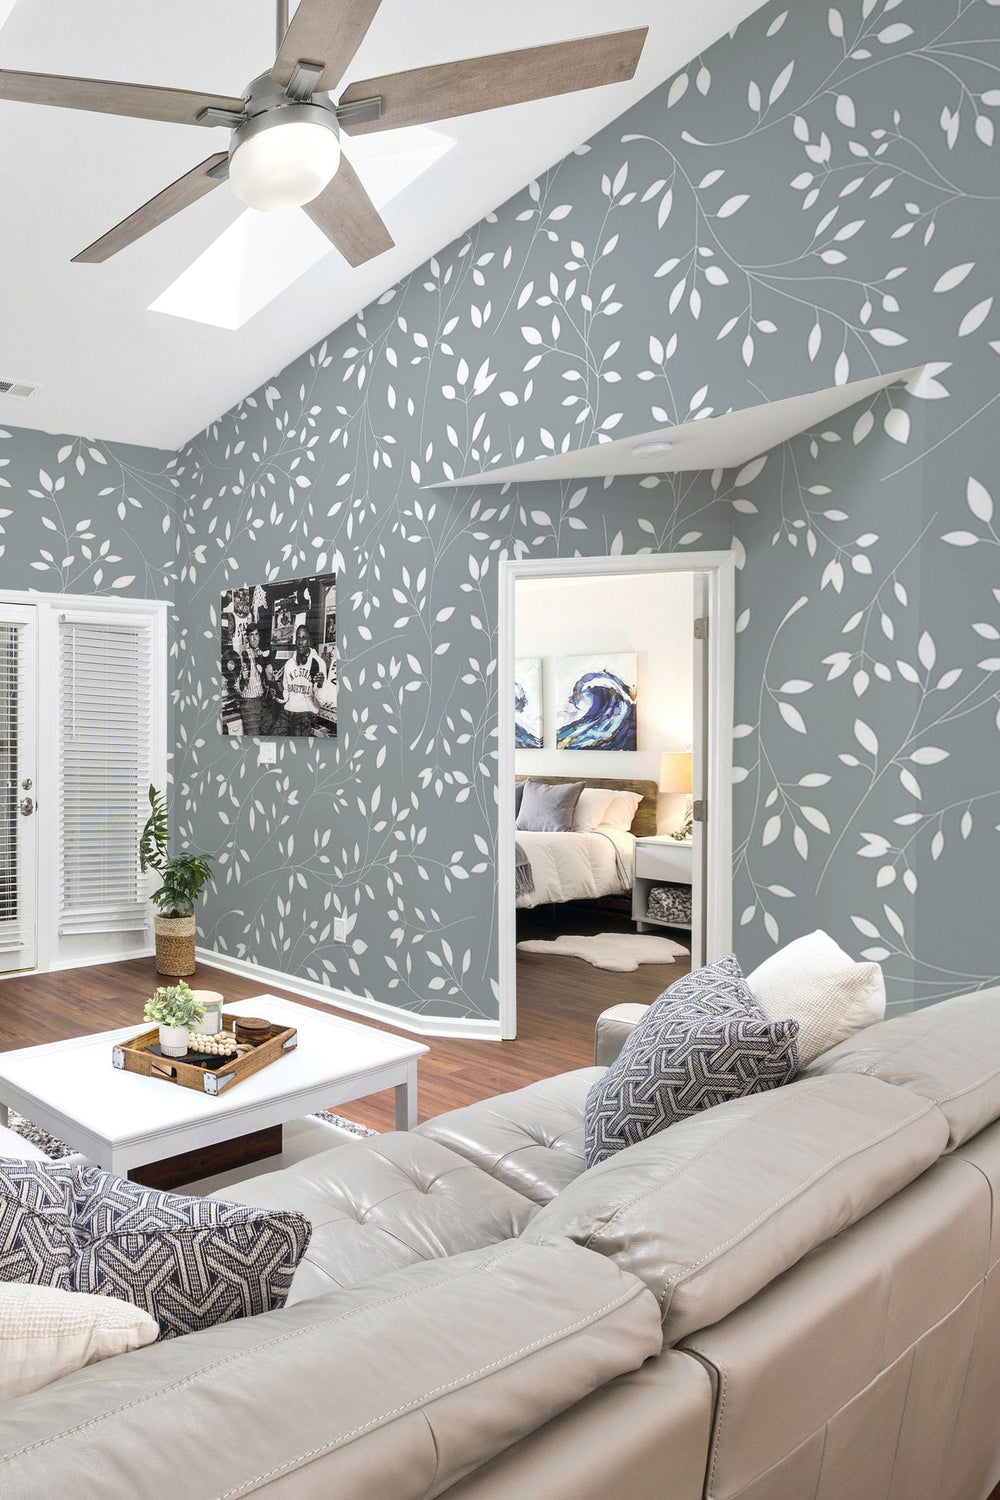 Stylish living room interior with ceiling fan and leaf pattern wall mural with a view into the adjoining bedroom